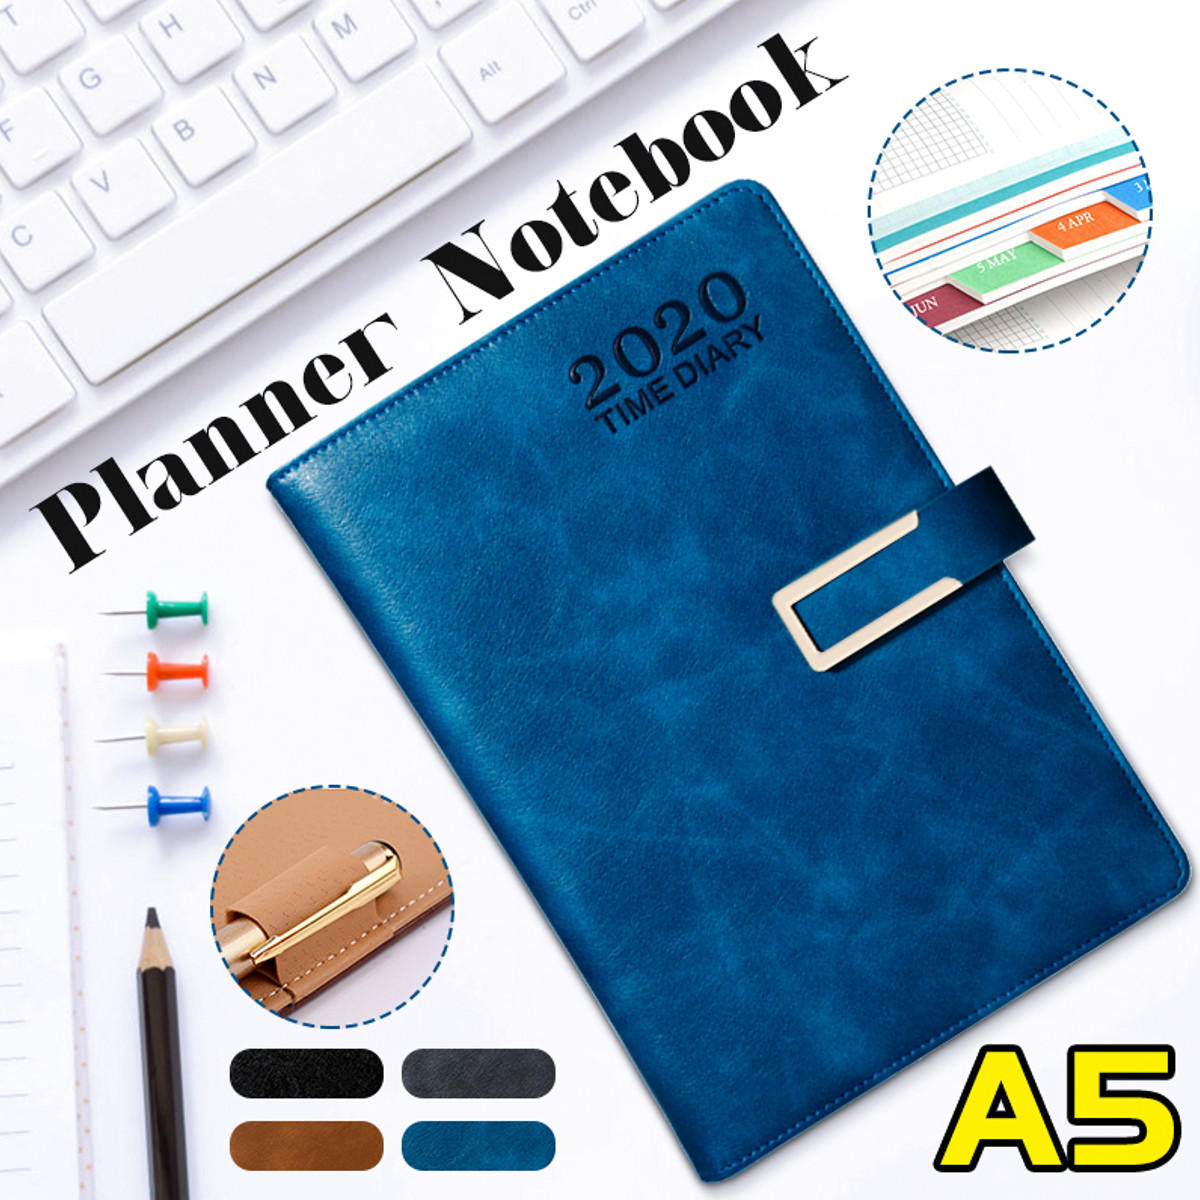 A5-Size-2020-Planner-Agenda-Annual-Calendar-Notebook-Portable-Weekly-Notes-Manual-DIY-Diary-Monthly--1621745-2